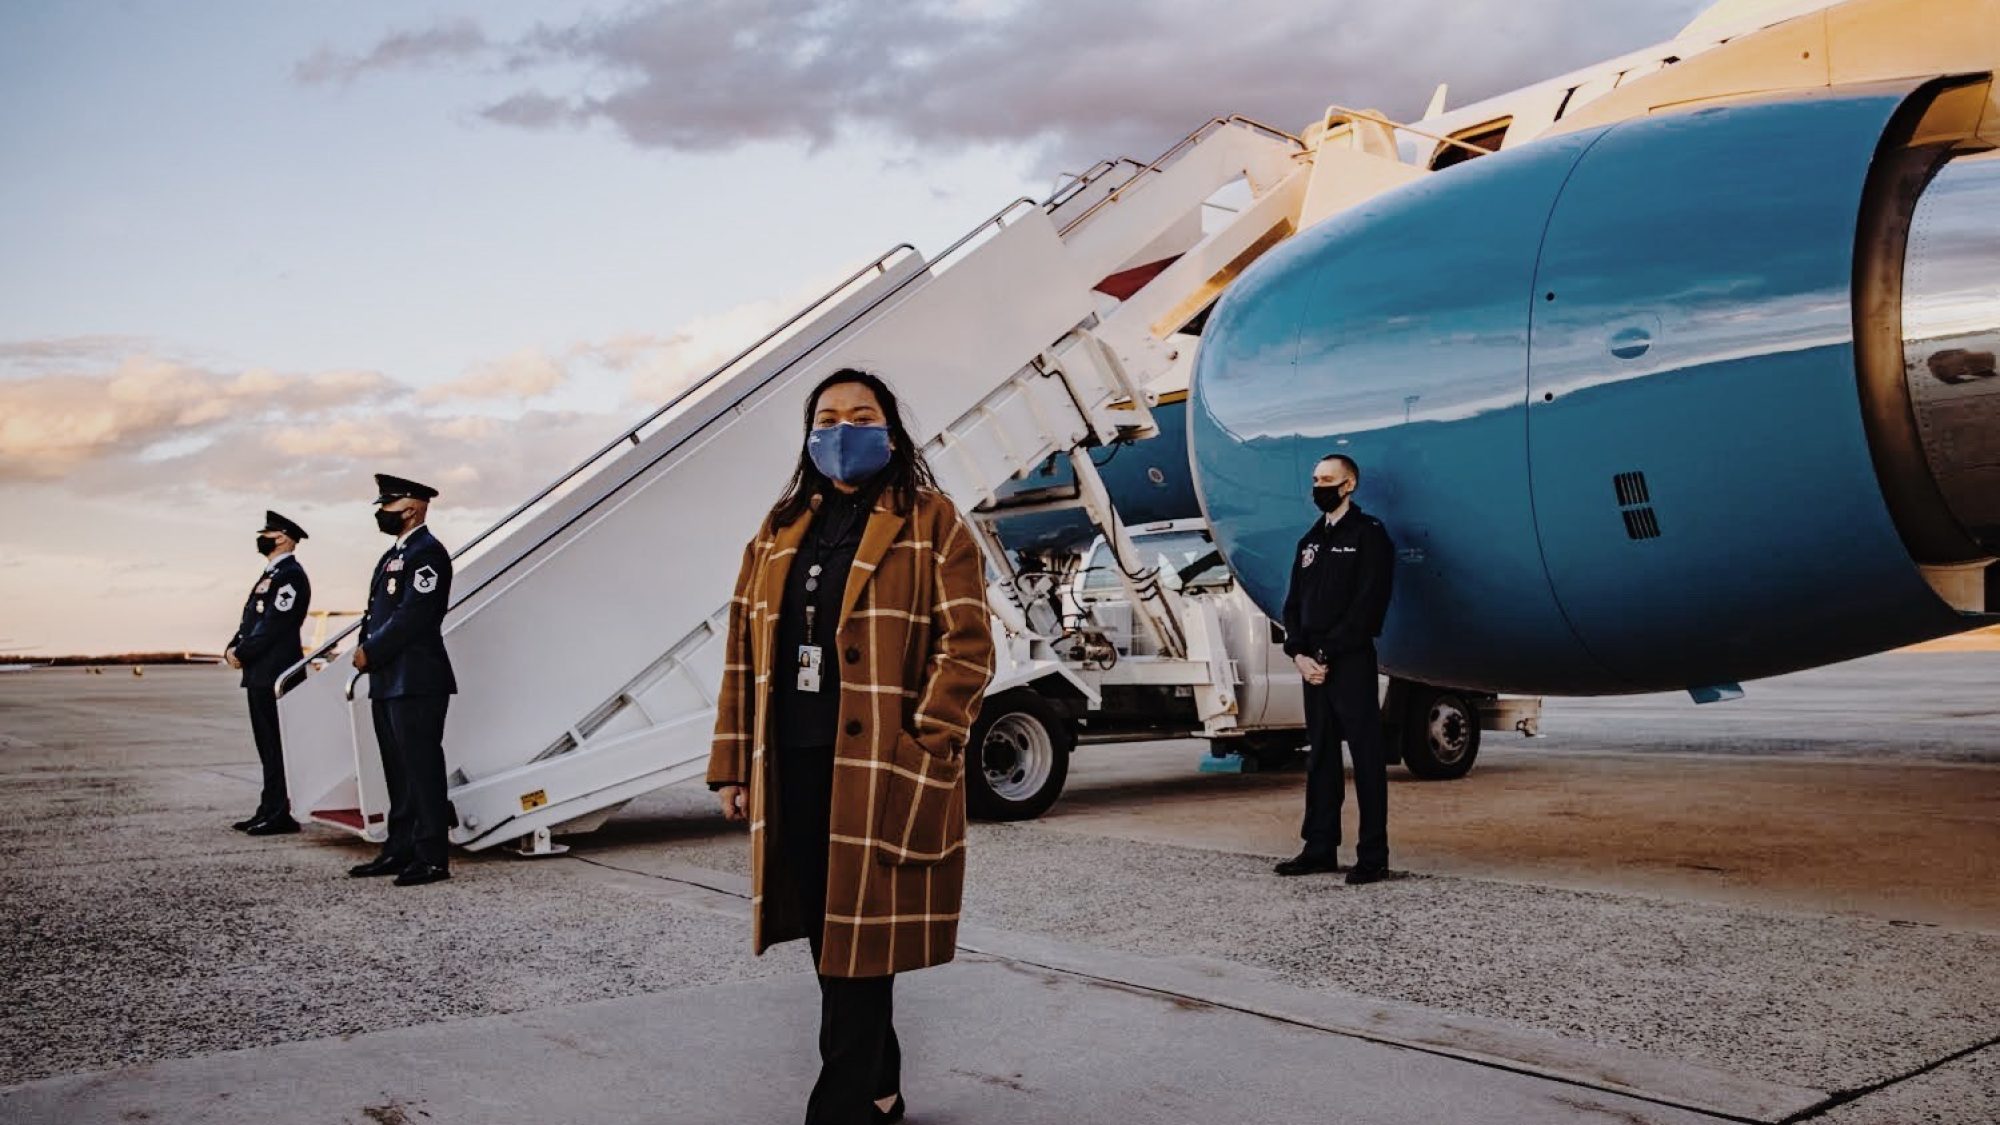 Angela Perez (C'20) pictured outside Air Force One